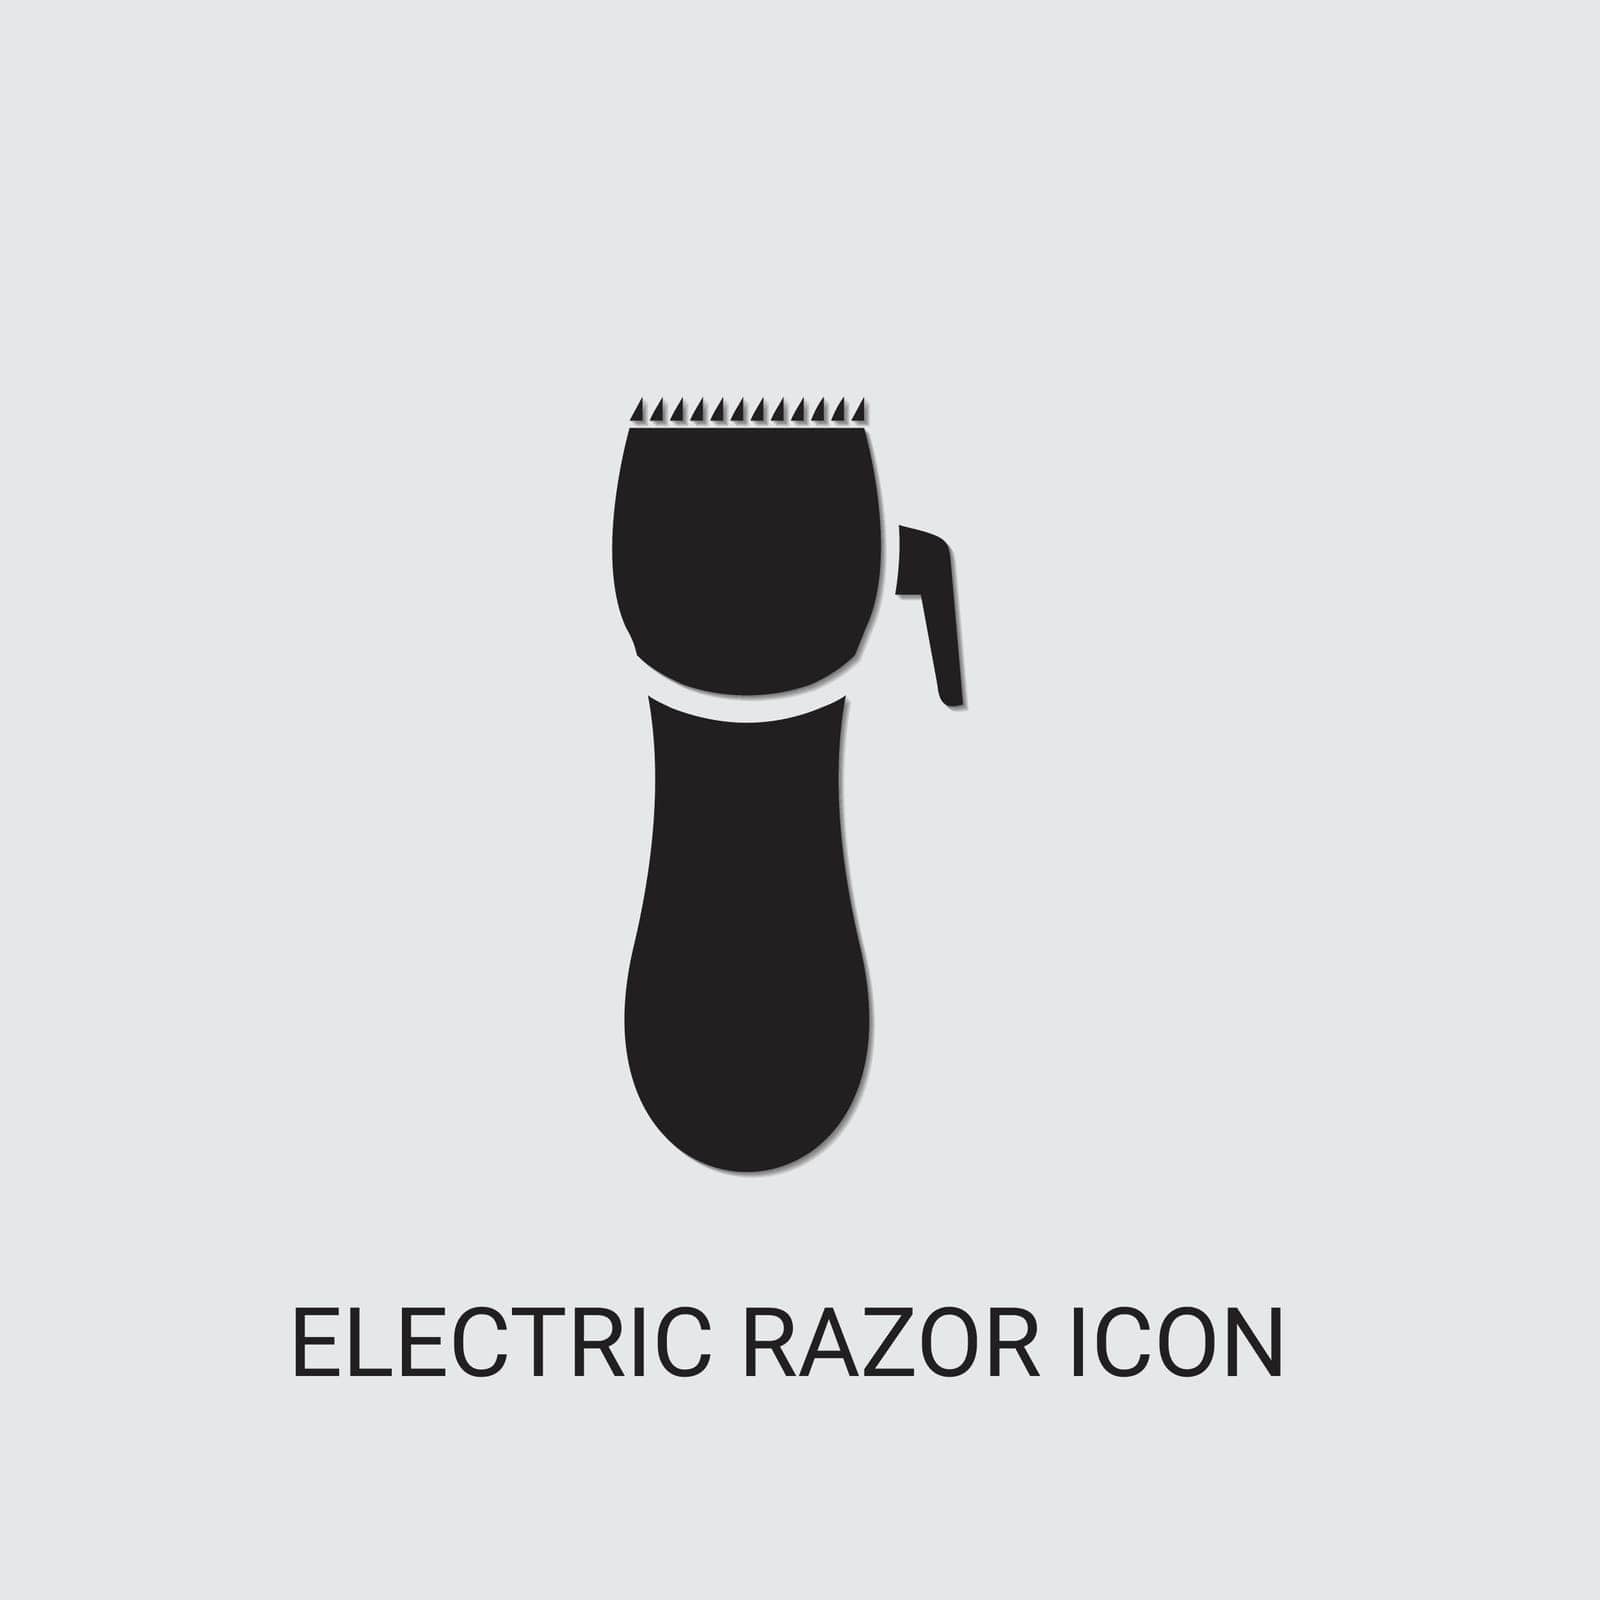 symbol,blades,cut,beauty,icon,sign,isolated,cutter,hair,shaver,modern,hygiene,design,vector,barber,clipper,shave,element,groom,set,electric,equipment,filled,technology,sharp,face,removal,razor,illustration,care